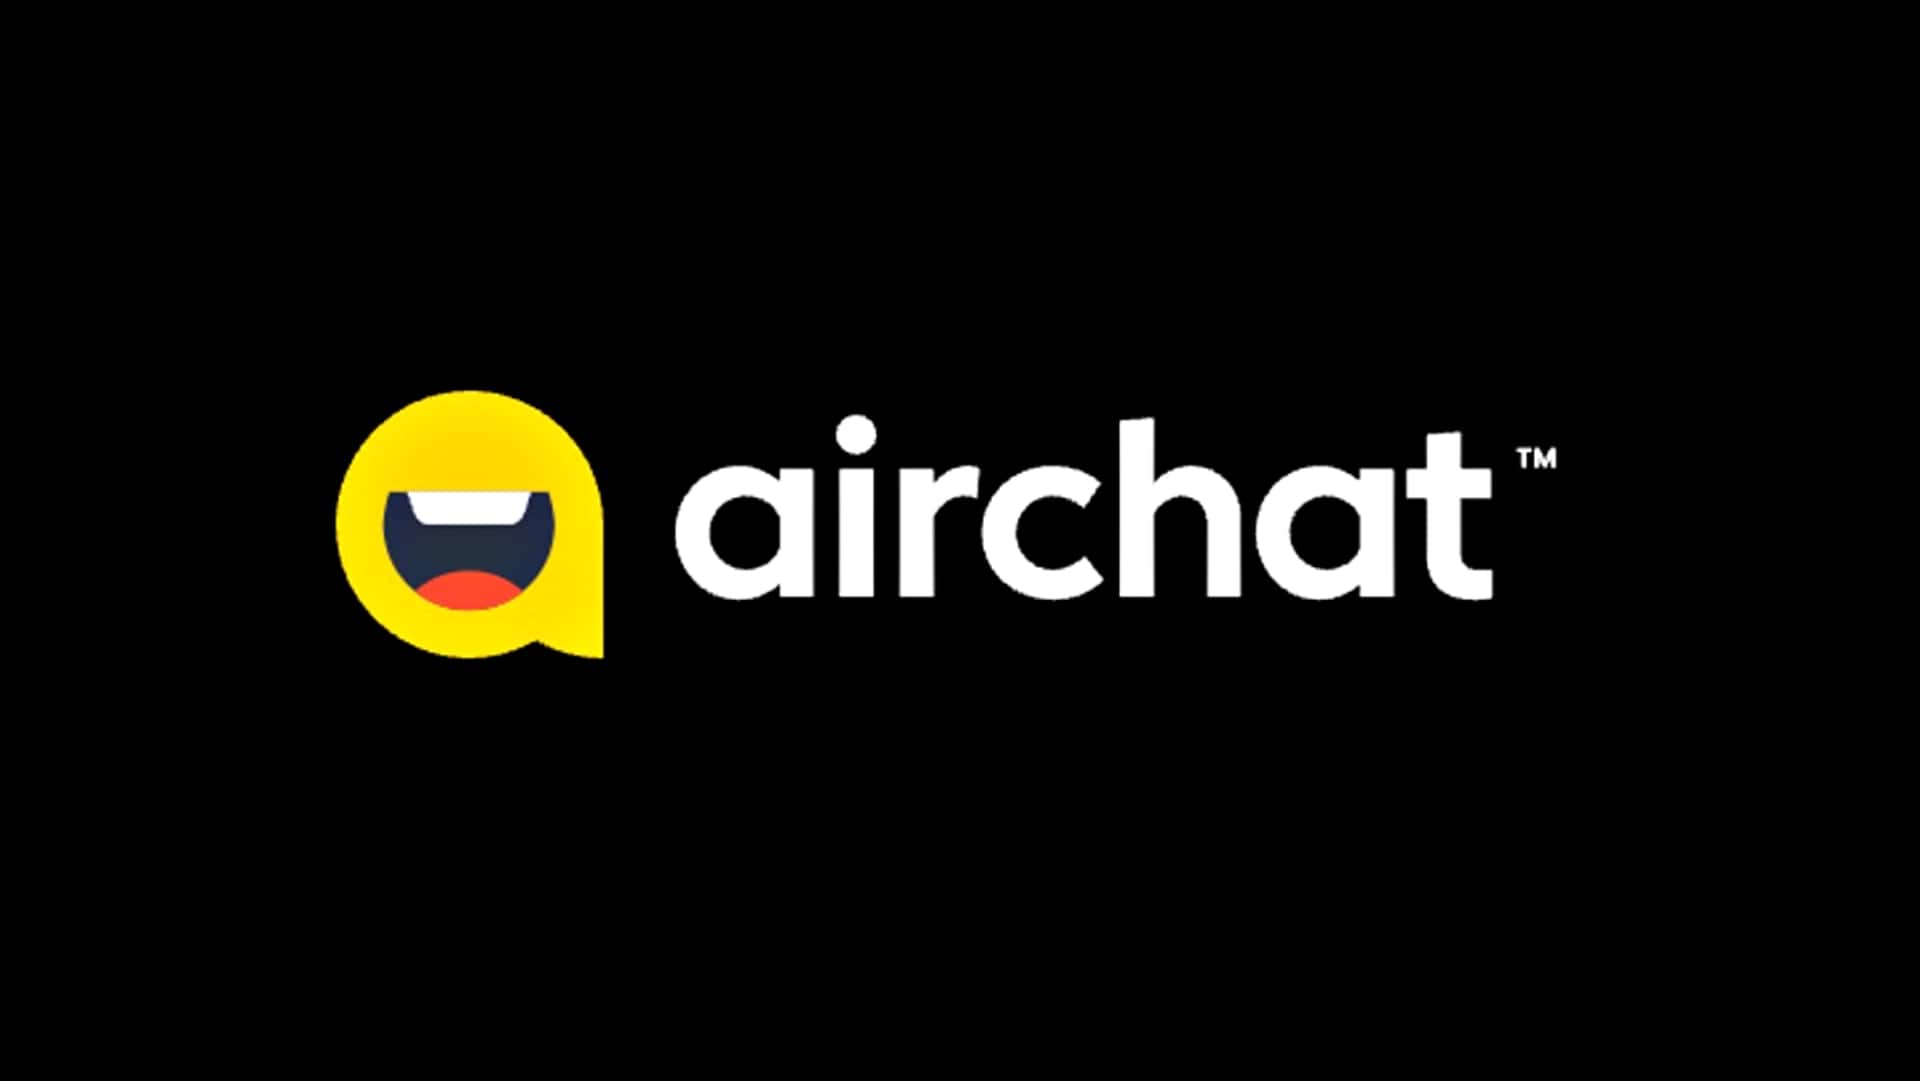 Meet Airchat: An audio-centric social media app for introverts